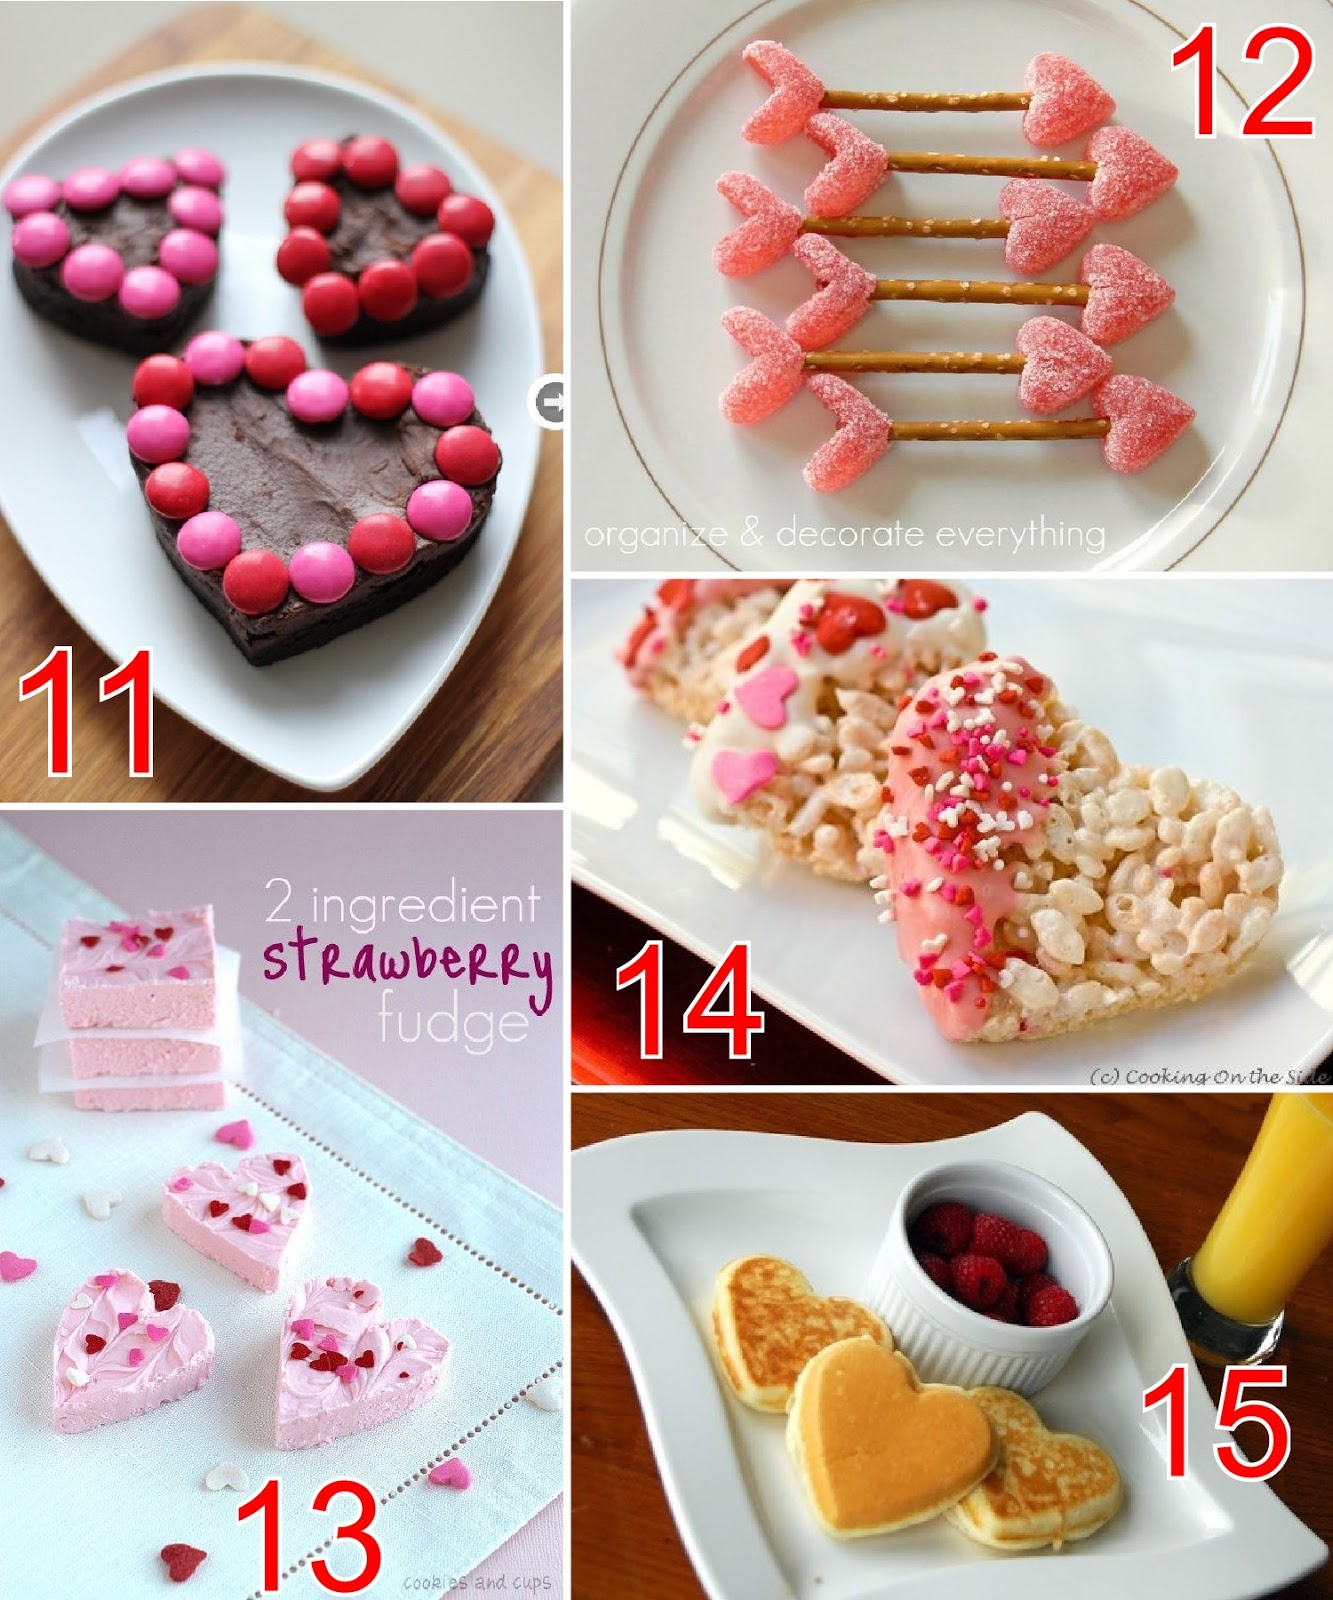 heart-shaped food ideas for Valentine's Day